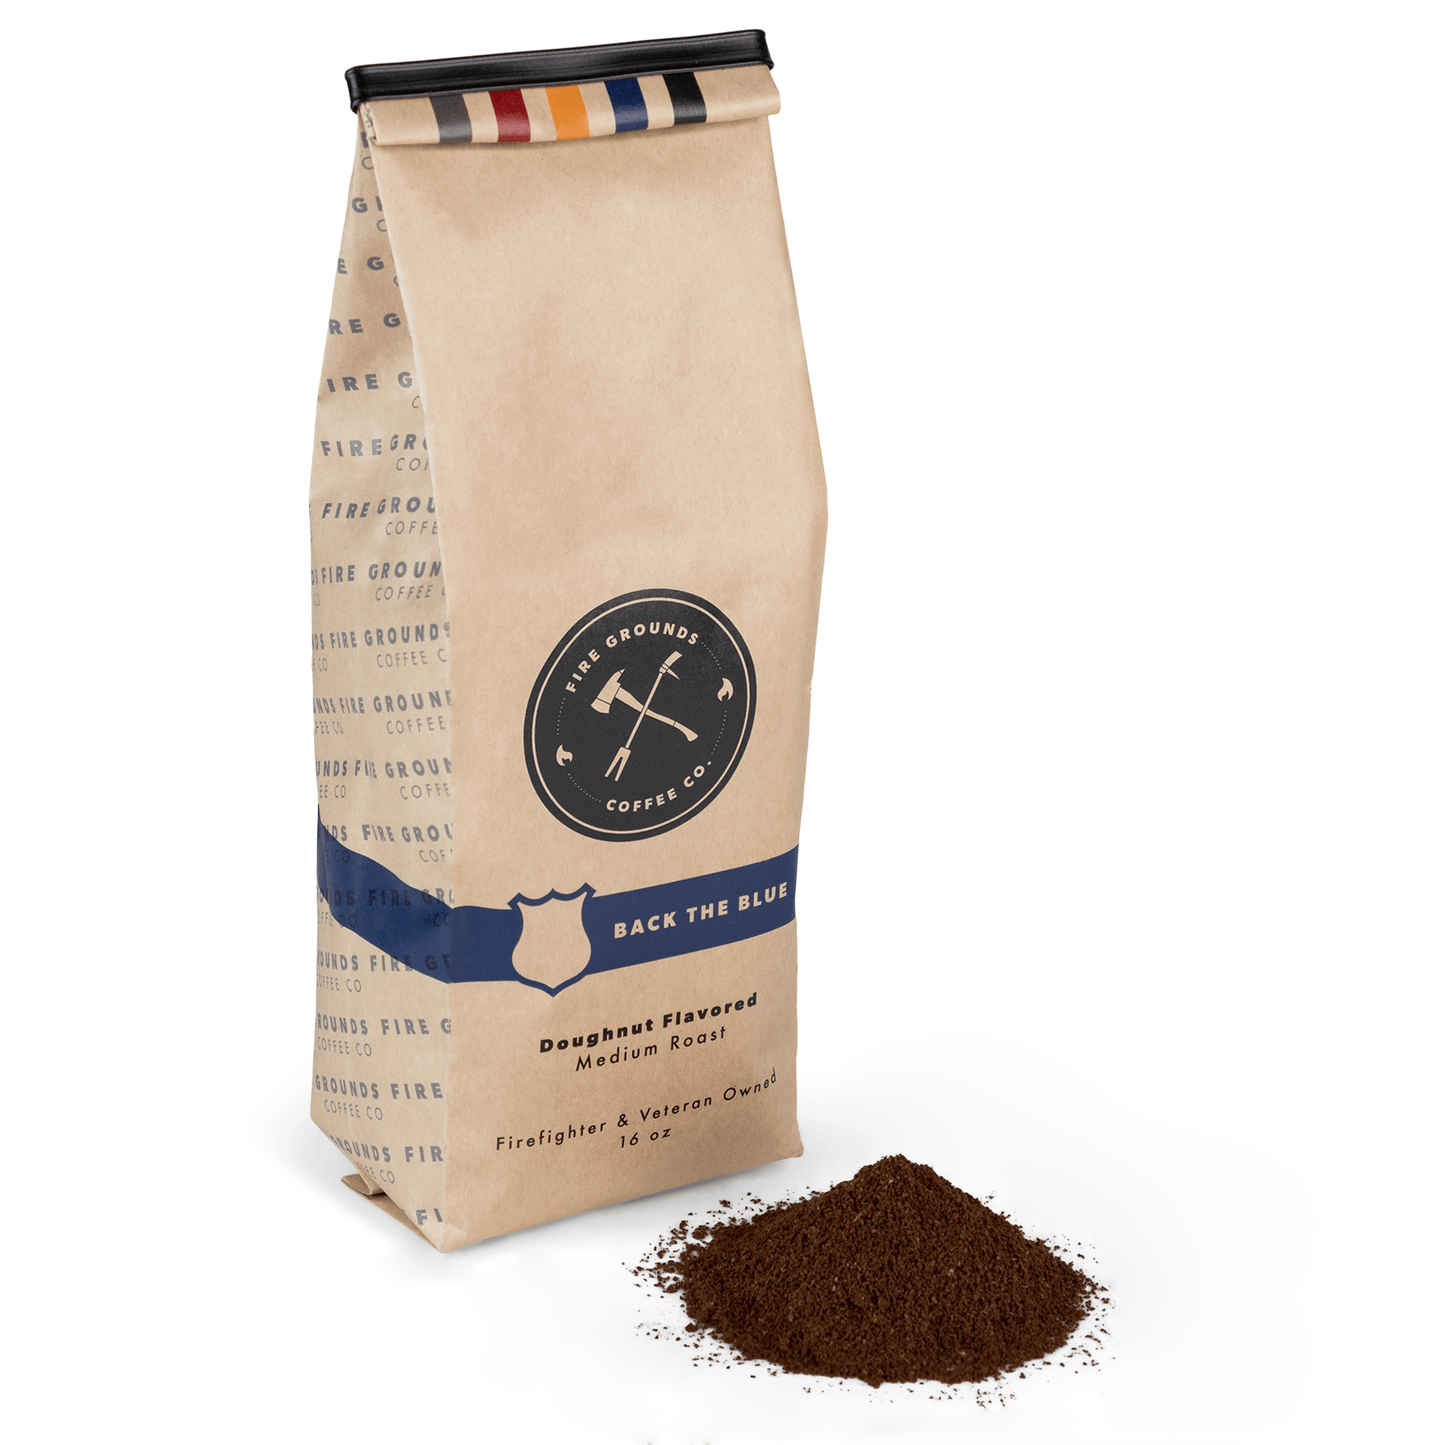 BACK THE BLUE (DOUGHNUT FLAVORED MEDIUM ROAST) by Fire Grounds Coffee Company - The Hammer Sports